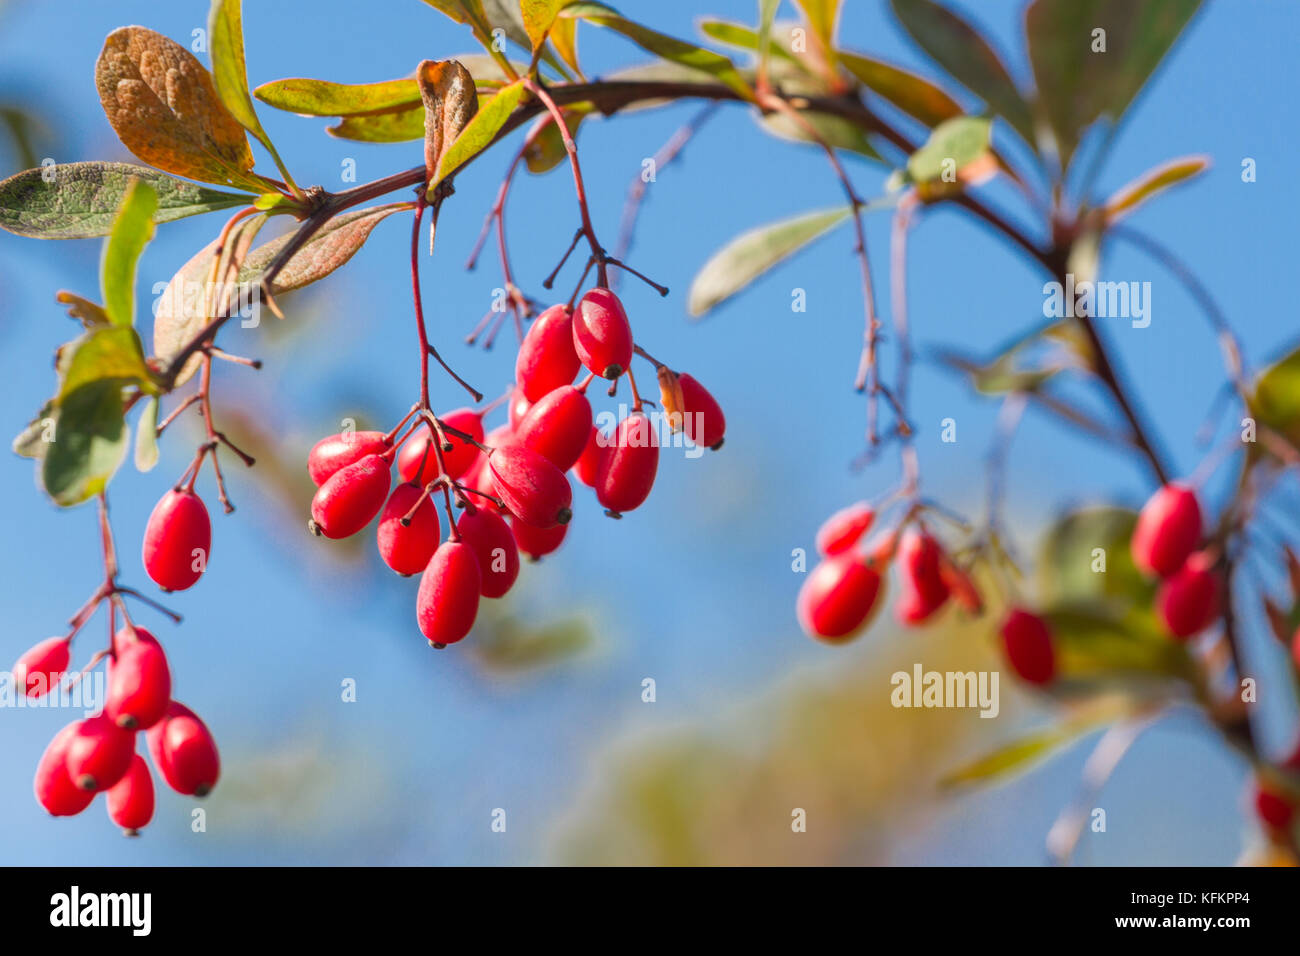 Branch of common barberry on sky background. European barberry red fruits. Stock Photo